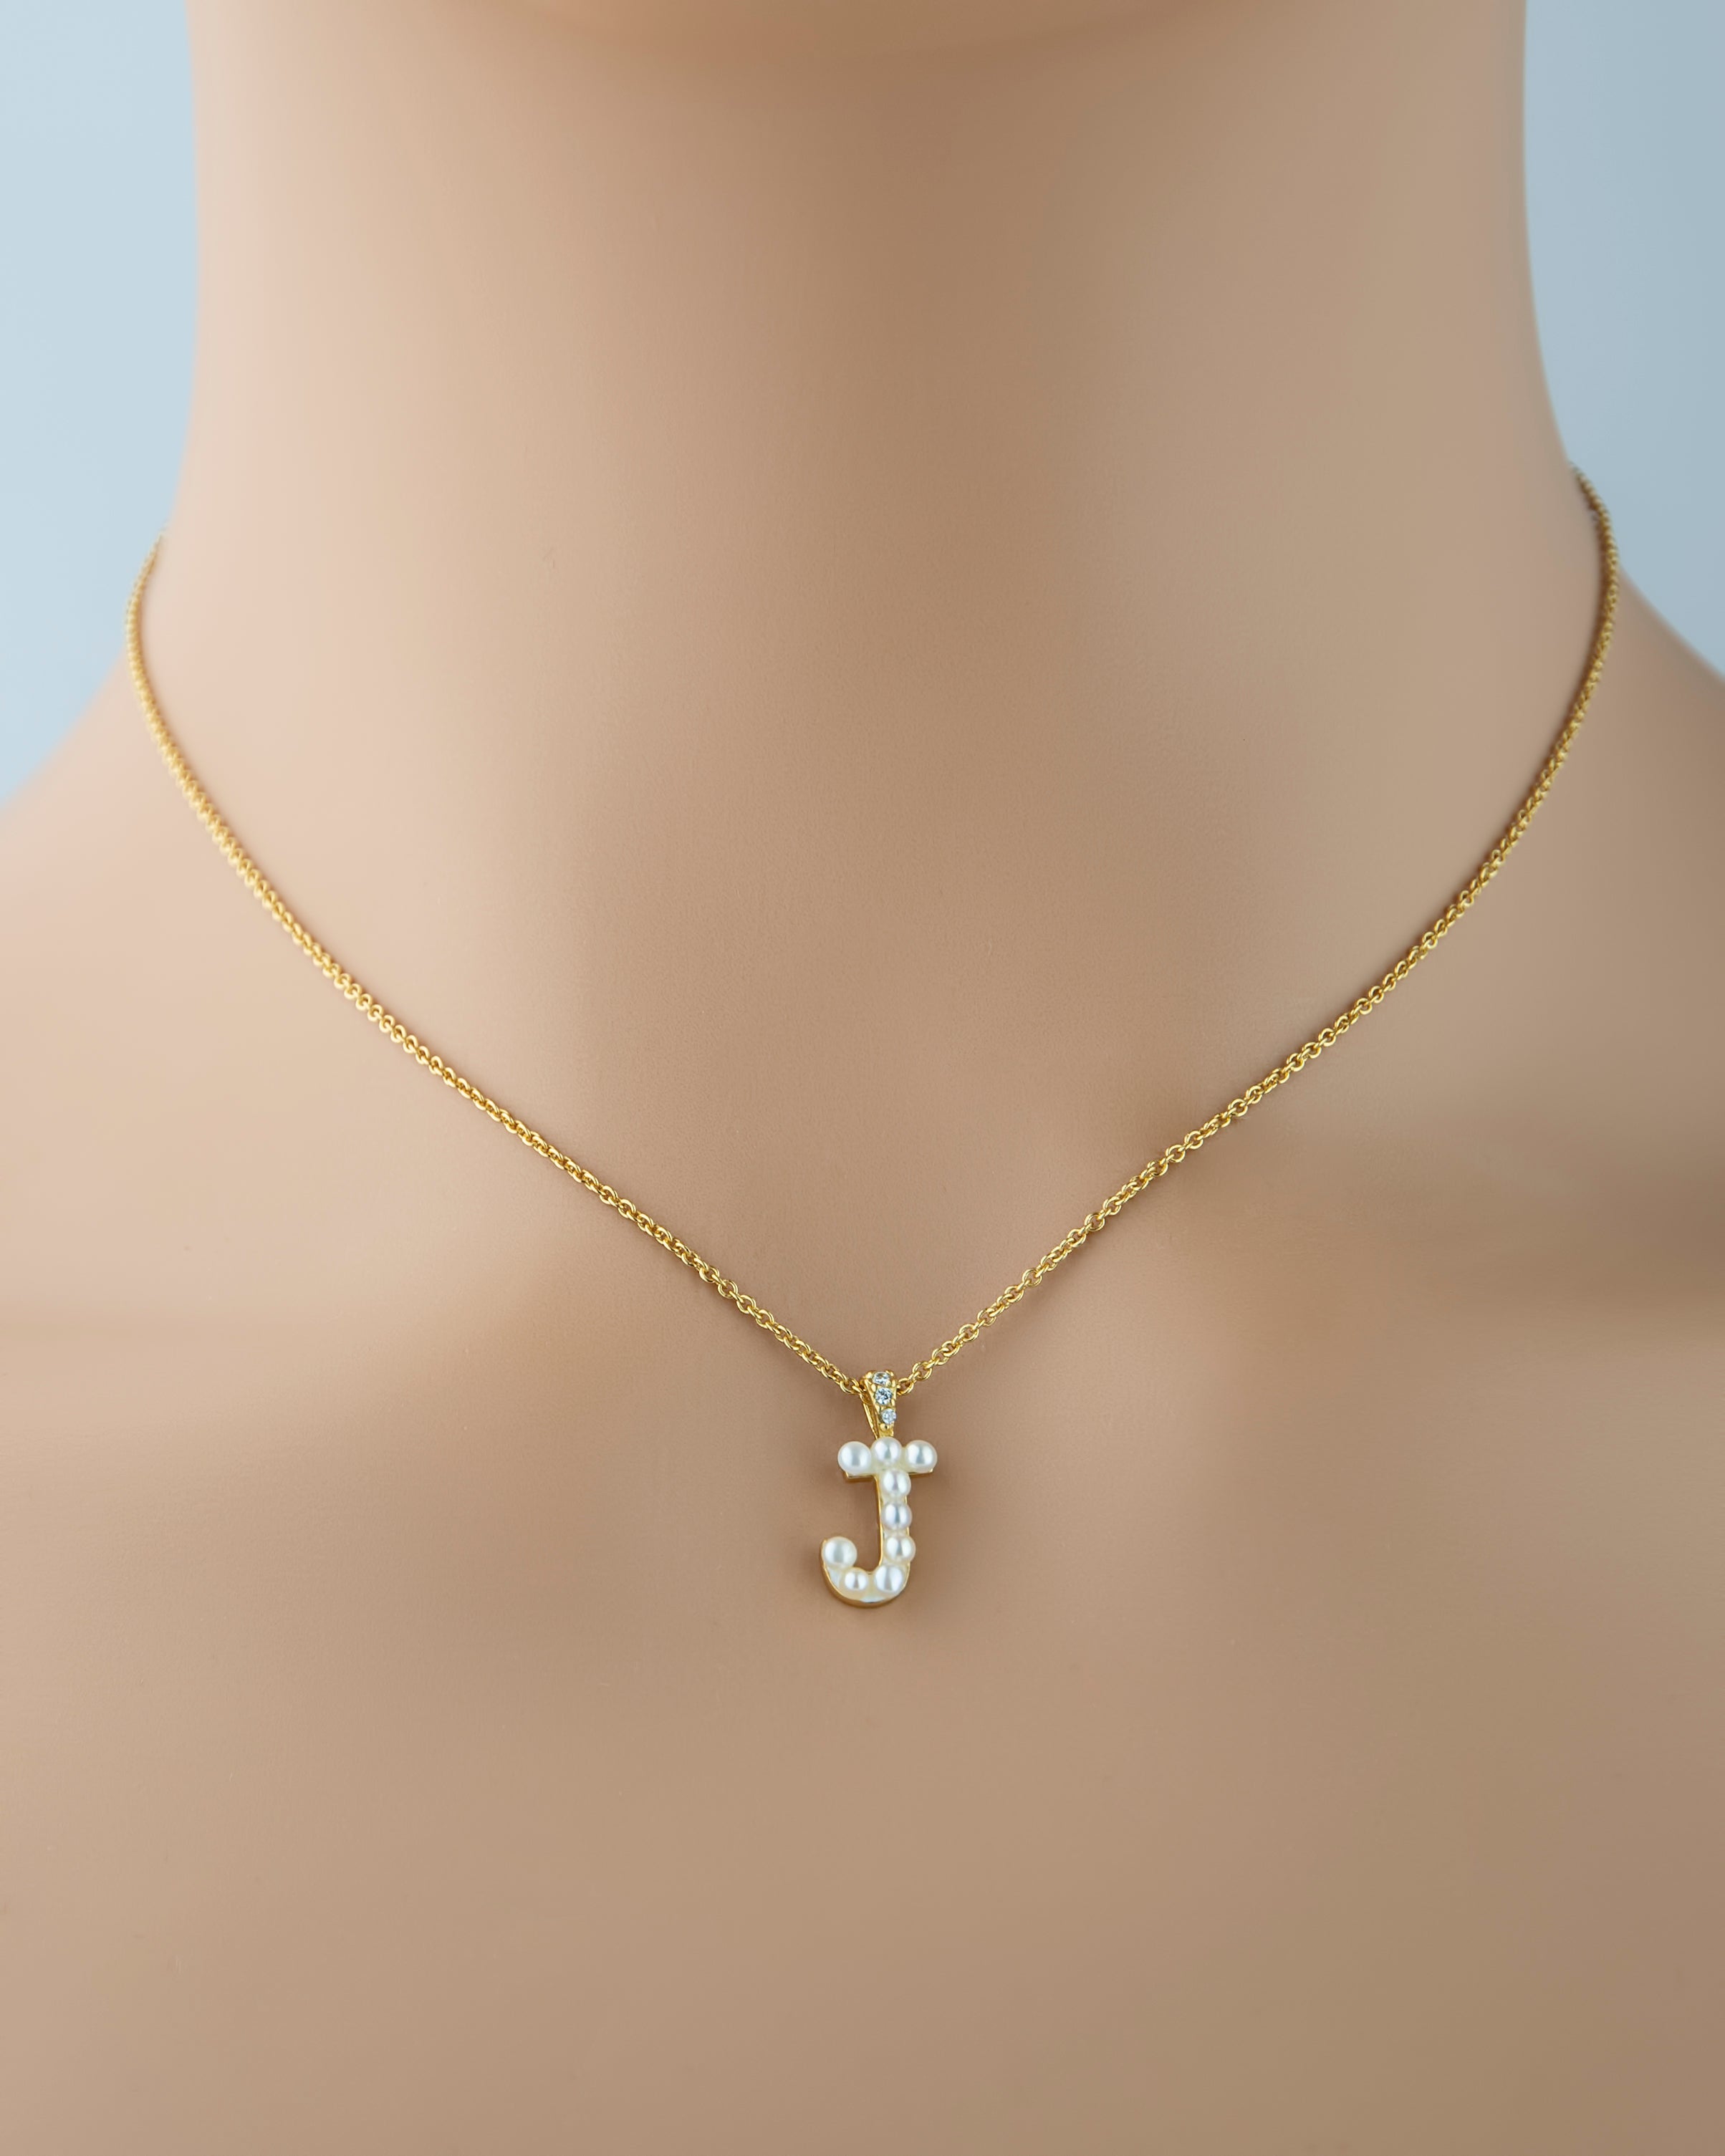 Freshwater Pearl Initial "J" Necklace